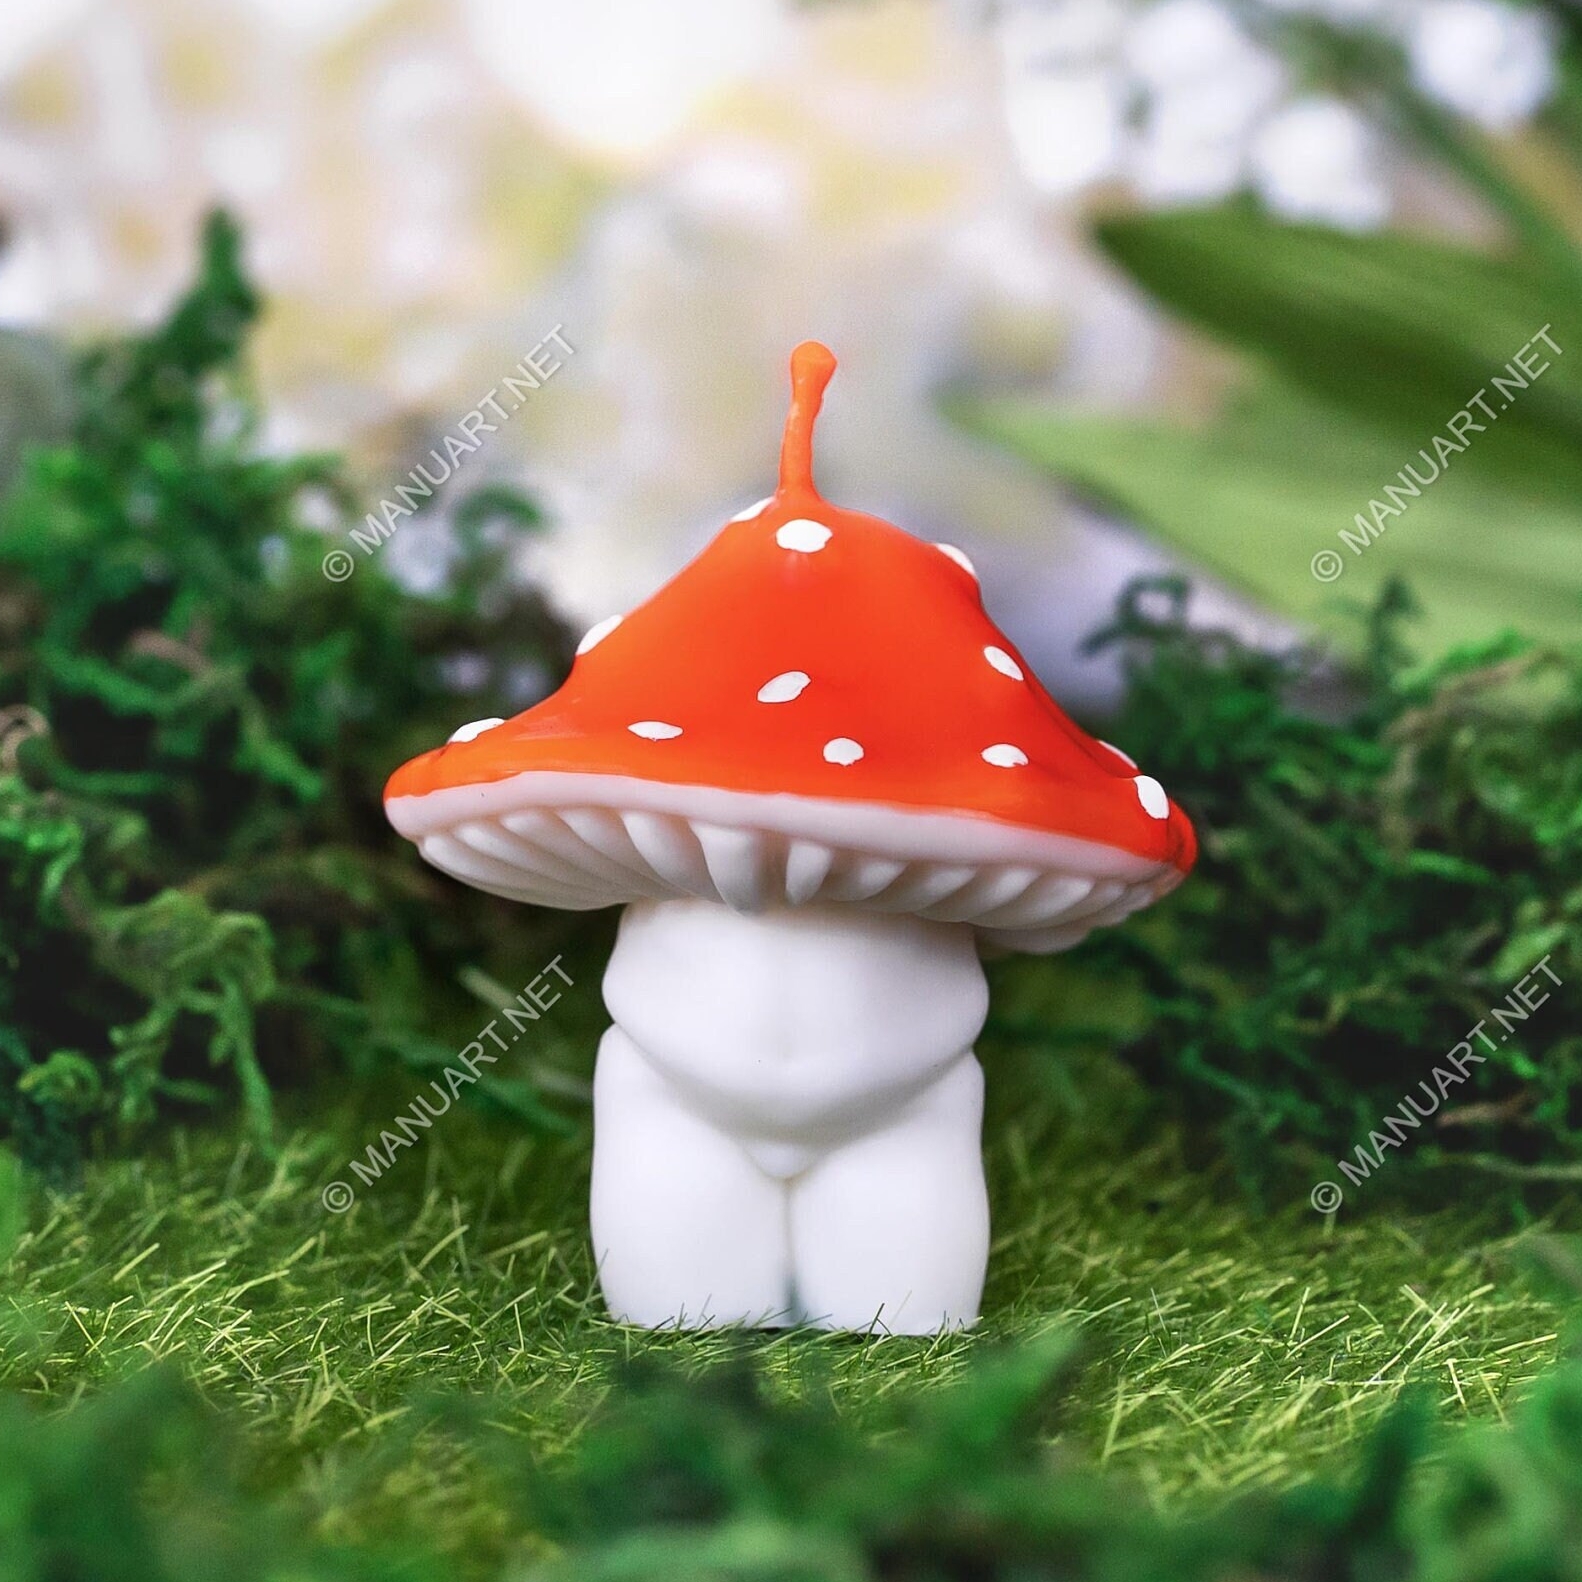 Silicone Mold - Little Male Mushroom - for Making Soaps, Candles and Figurines